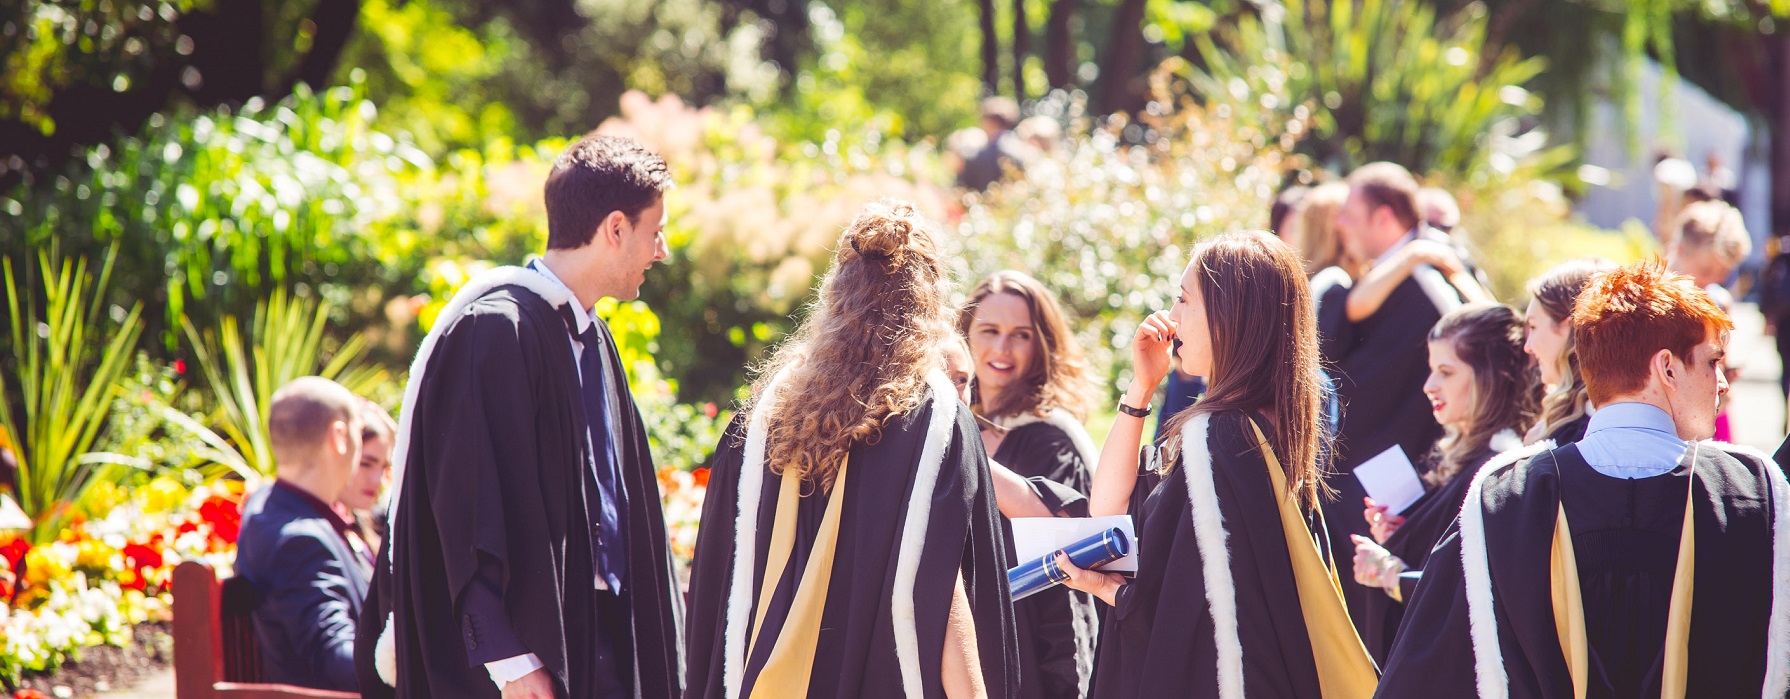 Photo of graduates in gowns celebrating their graduation